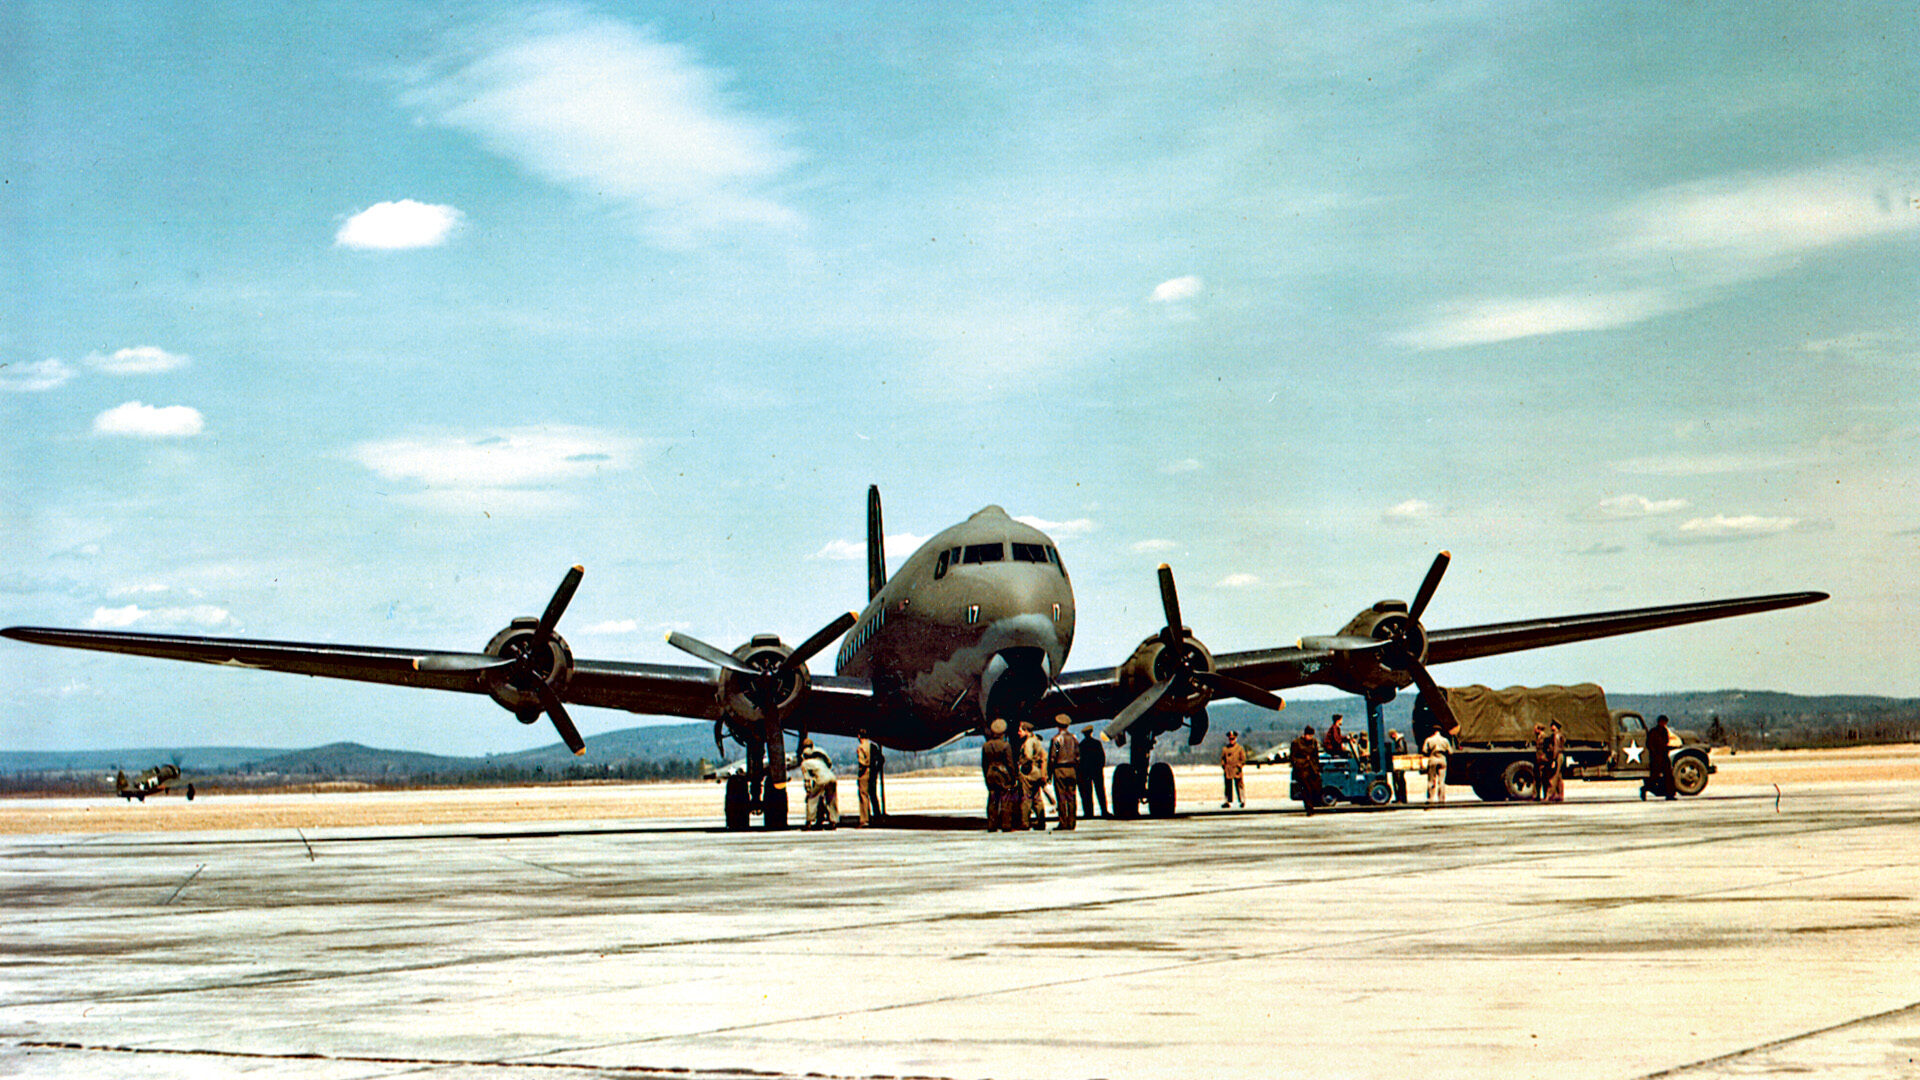 A C-54 transport, the military designation of the Douglas DC-4, is loaded and prepared for takeoff on one of the many crucial supply missions.